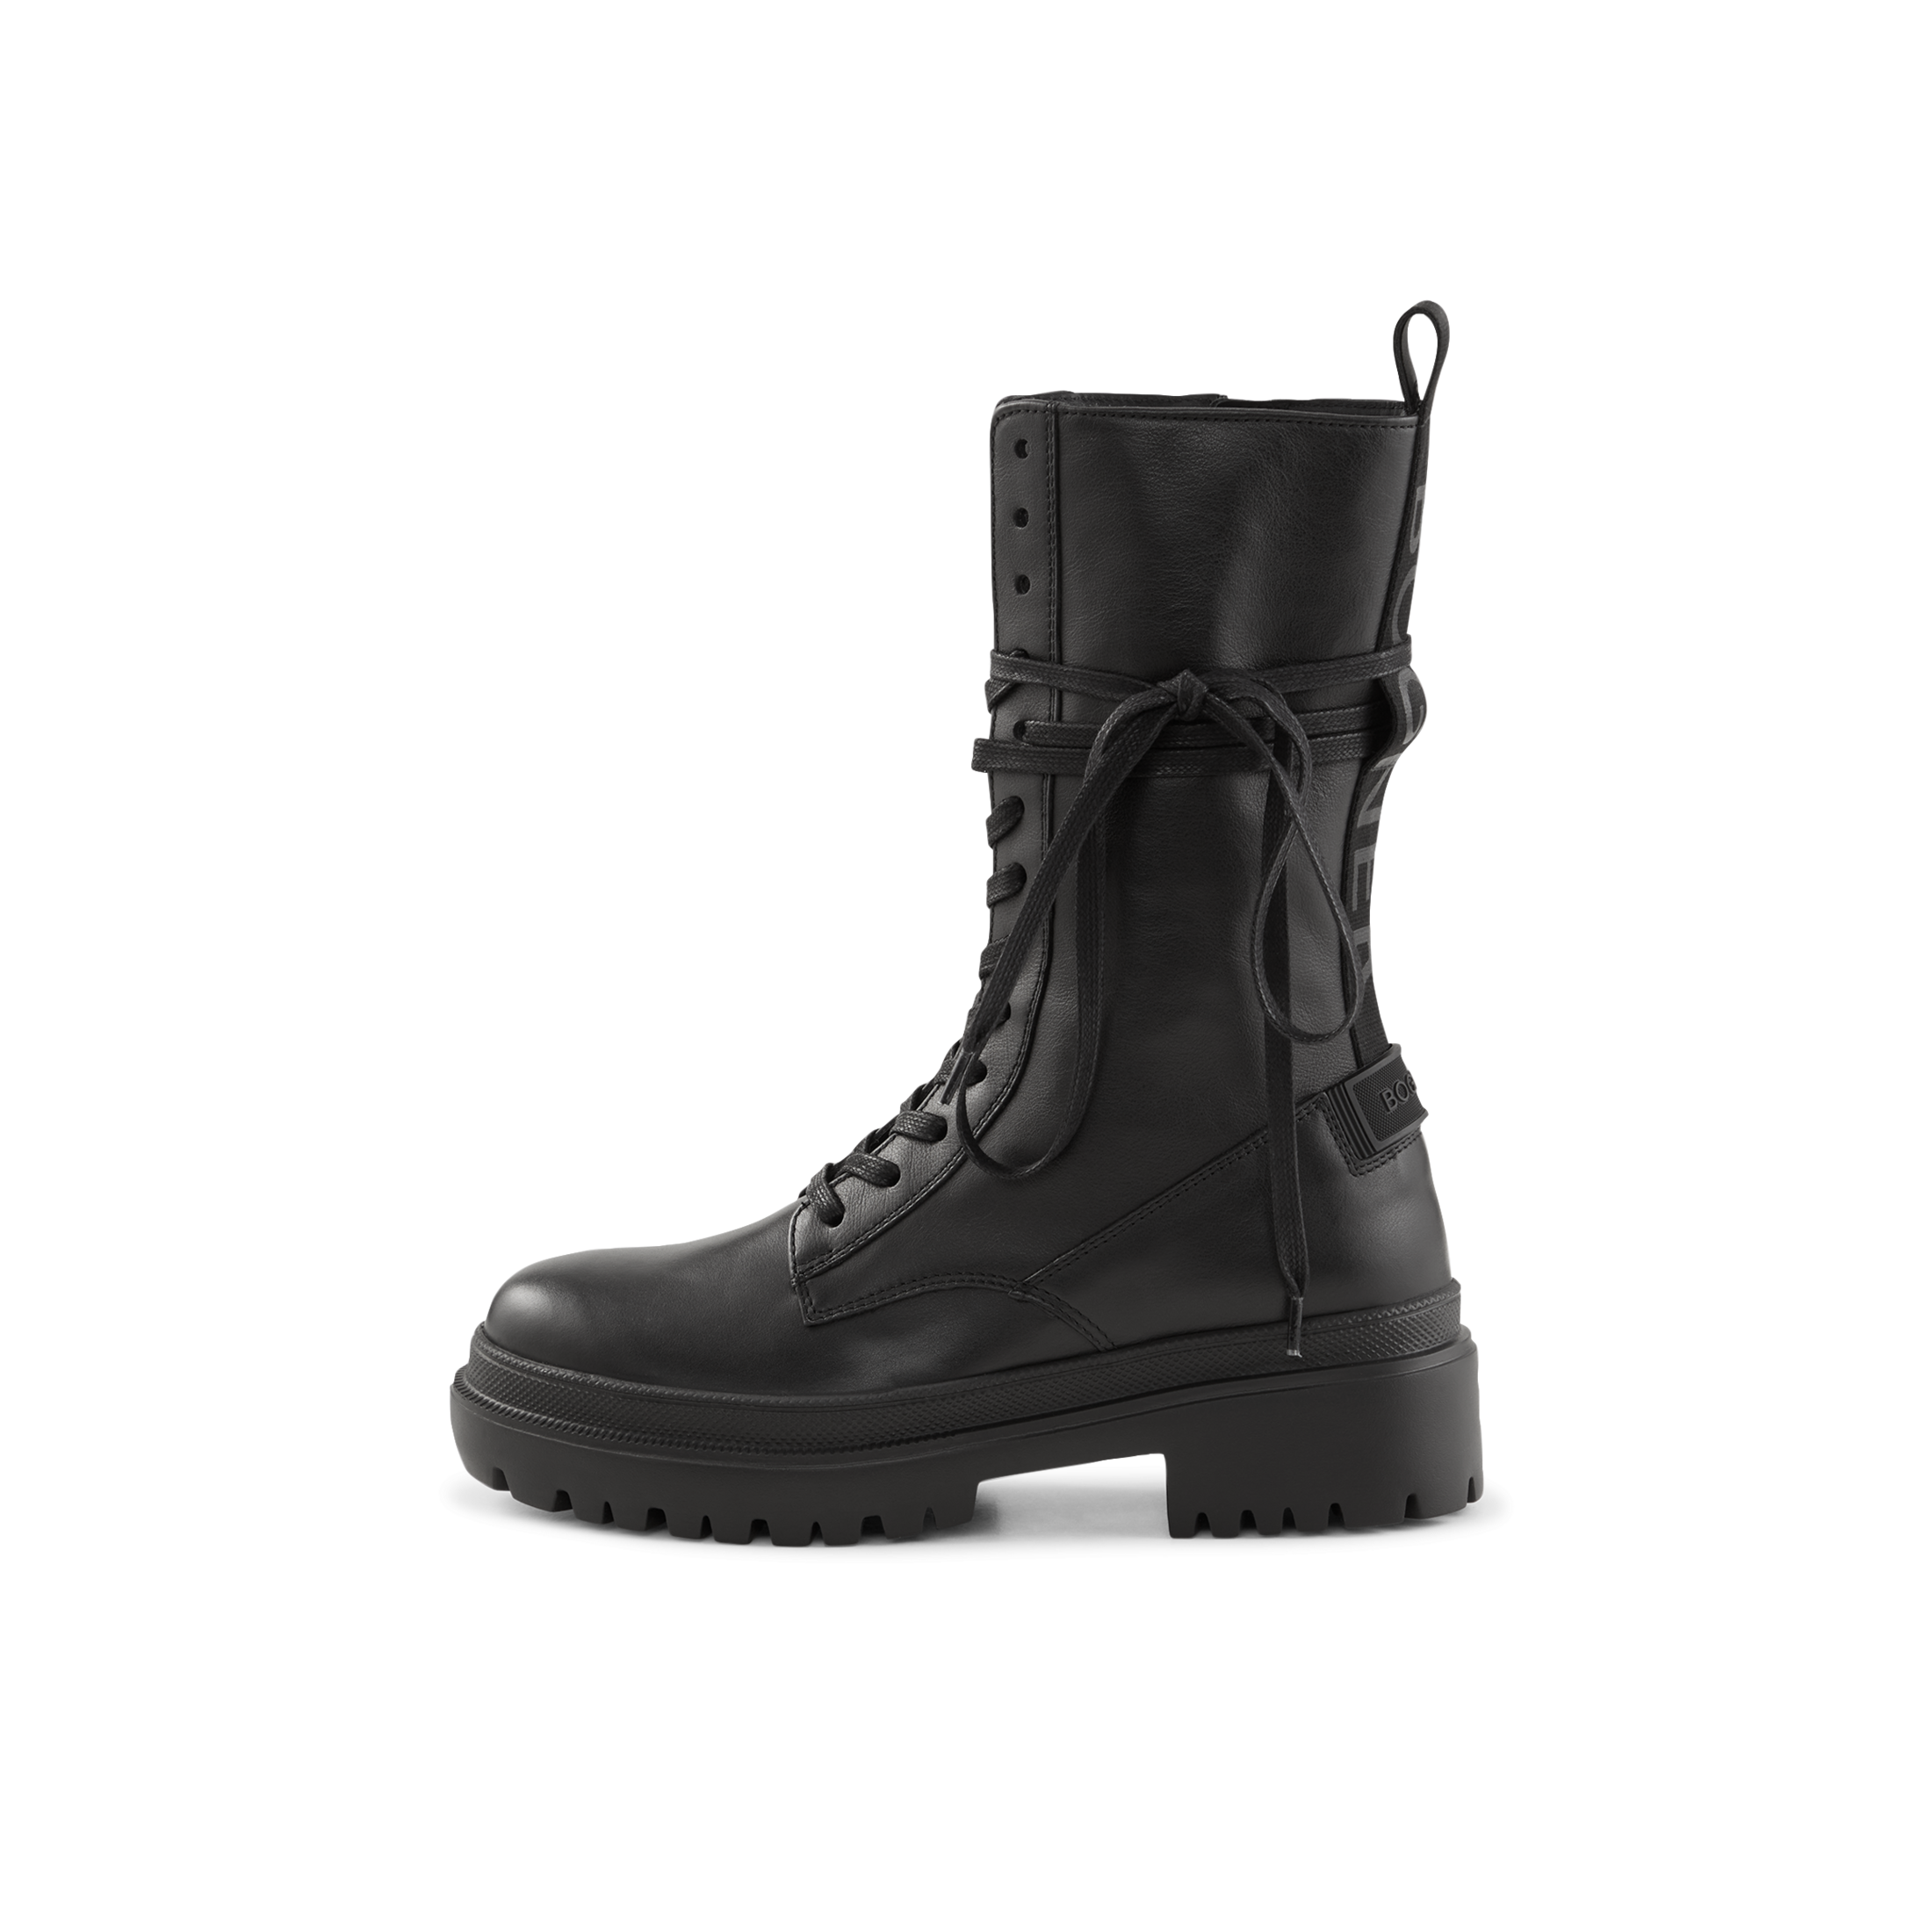 BOGNER Chesa Alpina Boots for women - Black - US 11 product